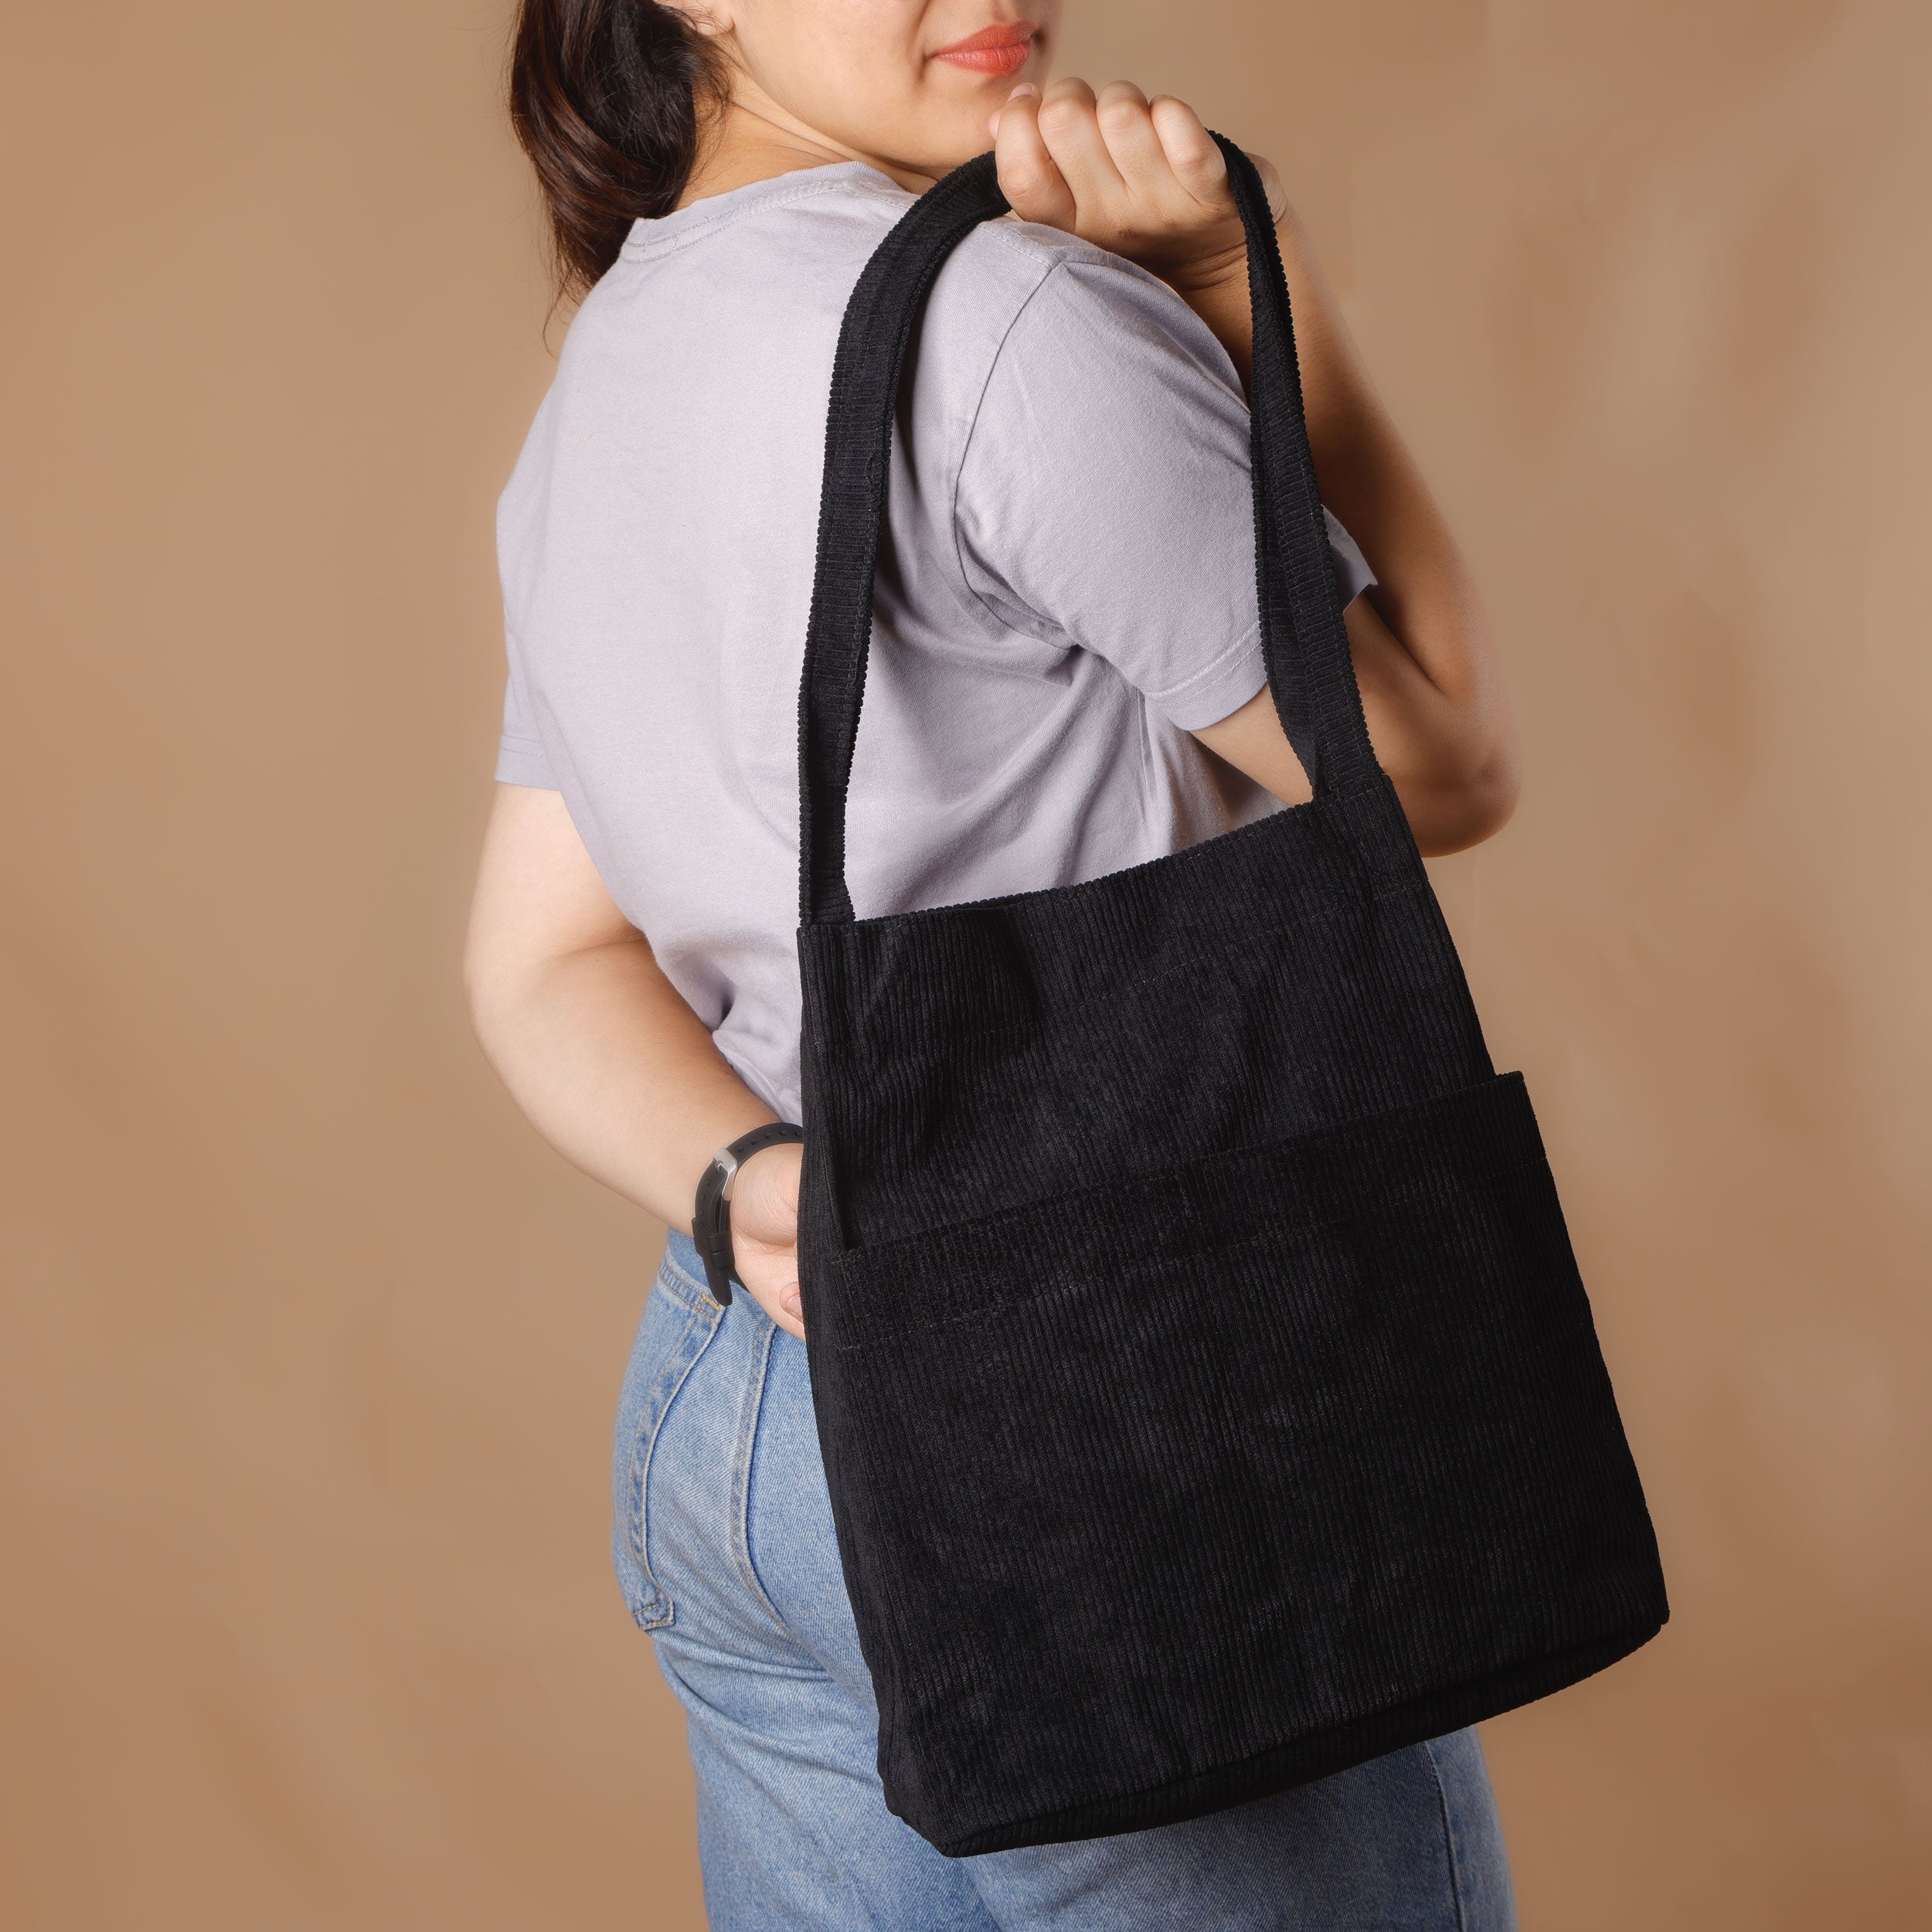 Branded Tote Bags for Women for College, Work and Daily Use – HK